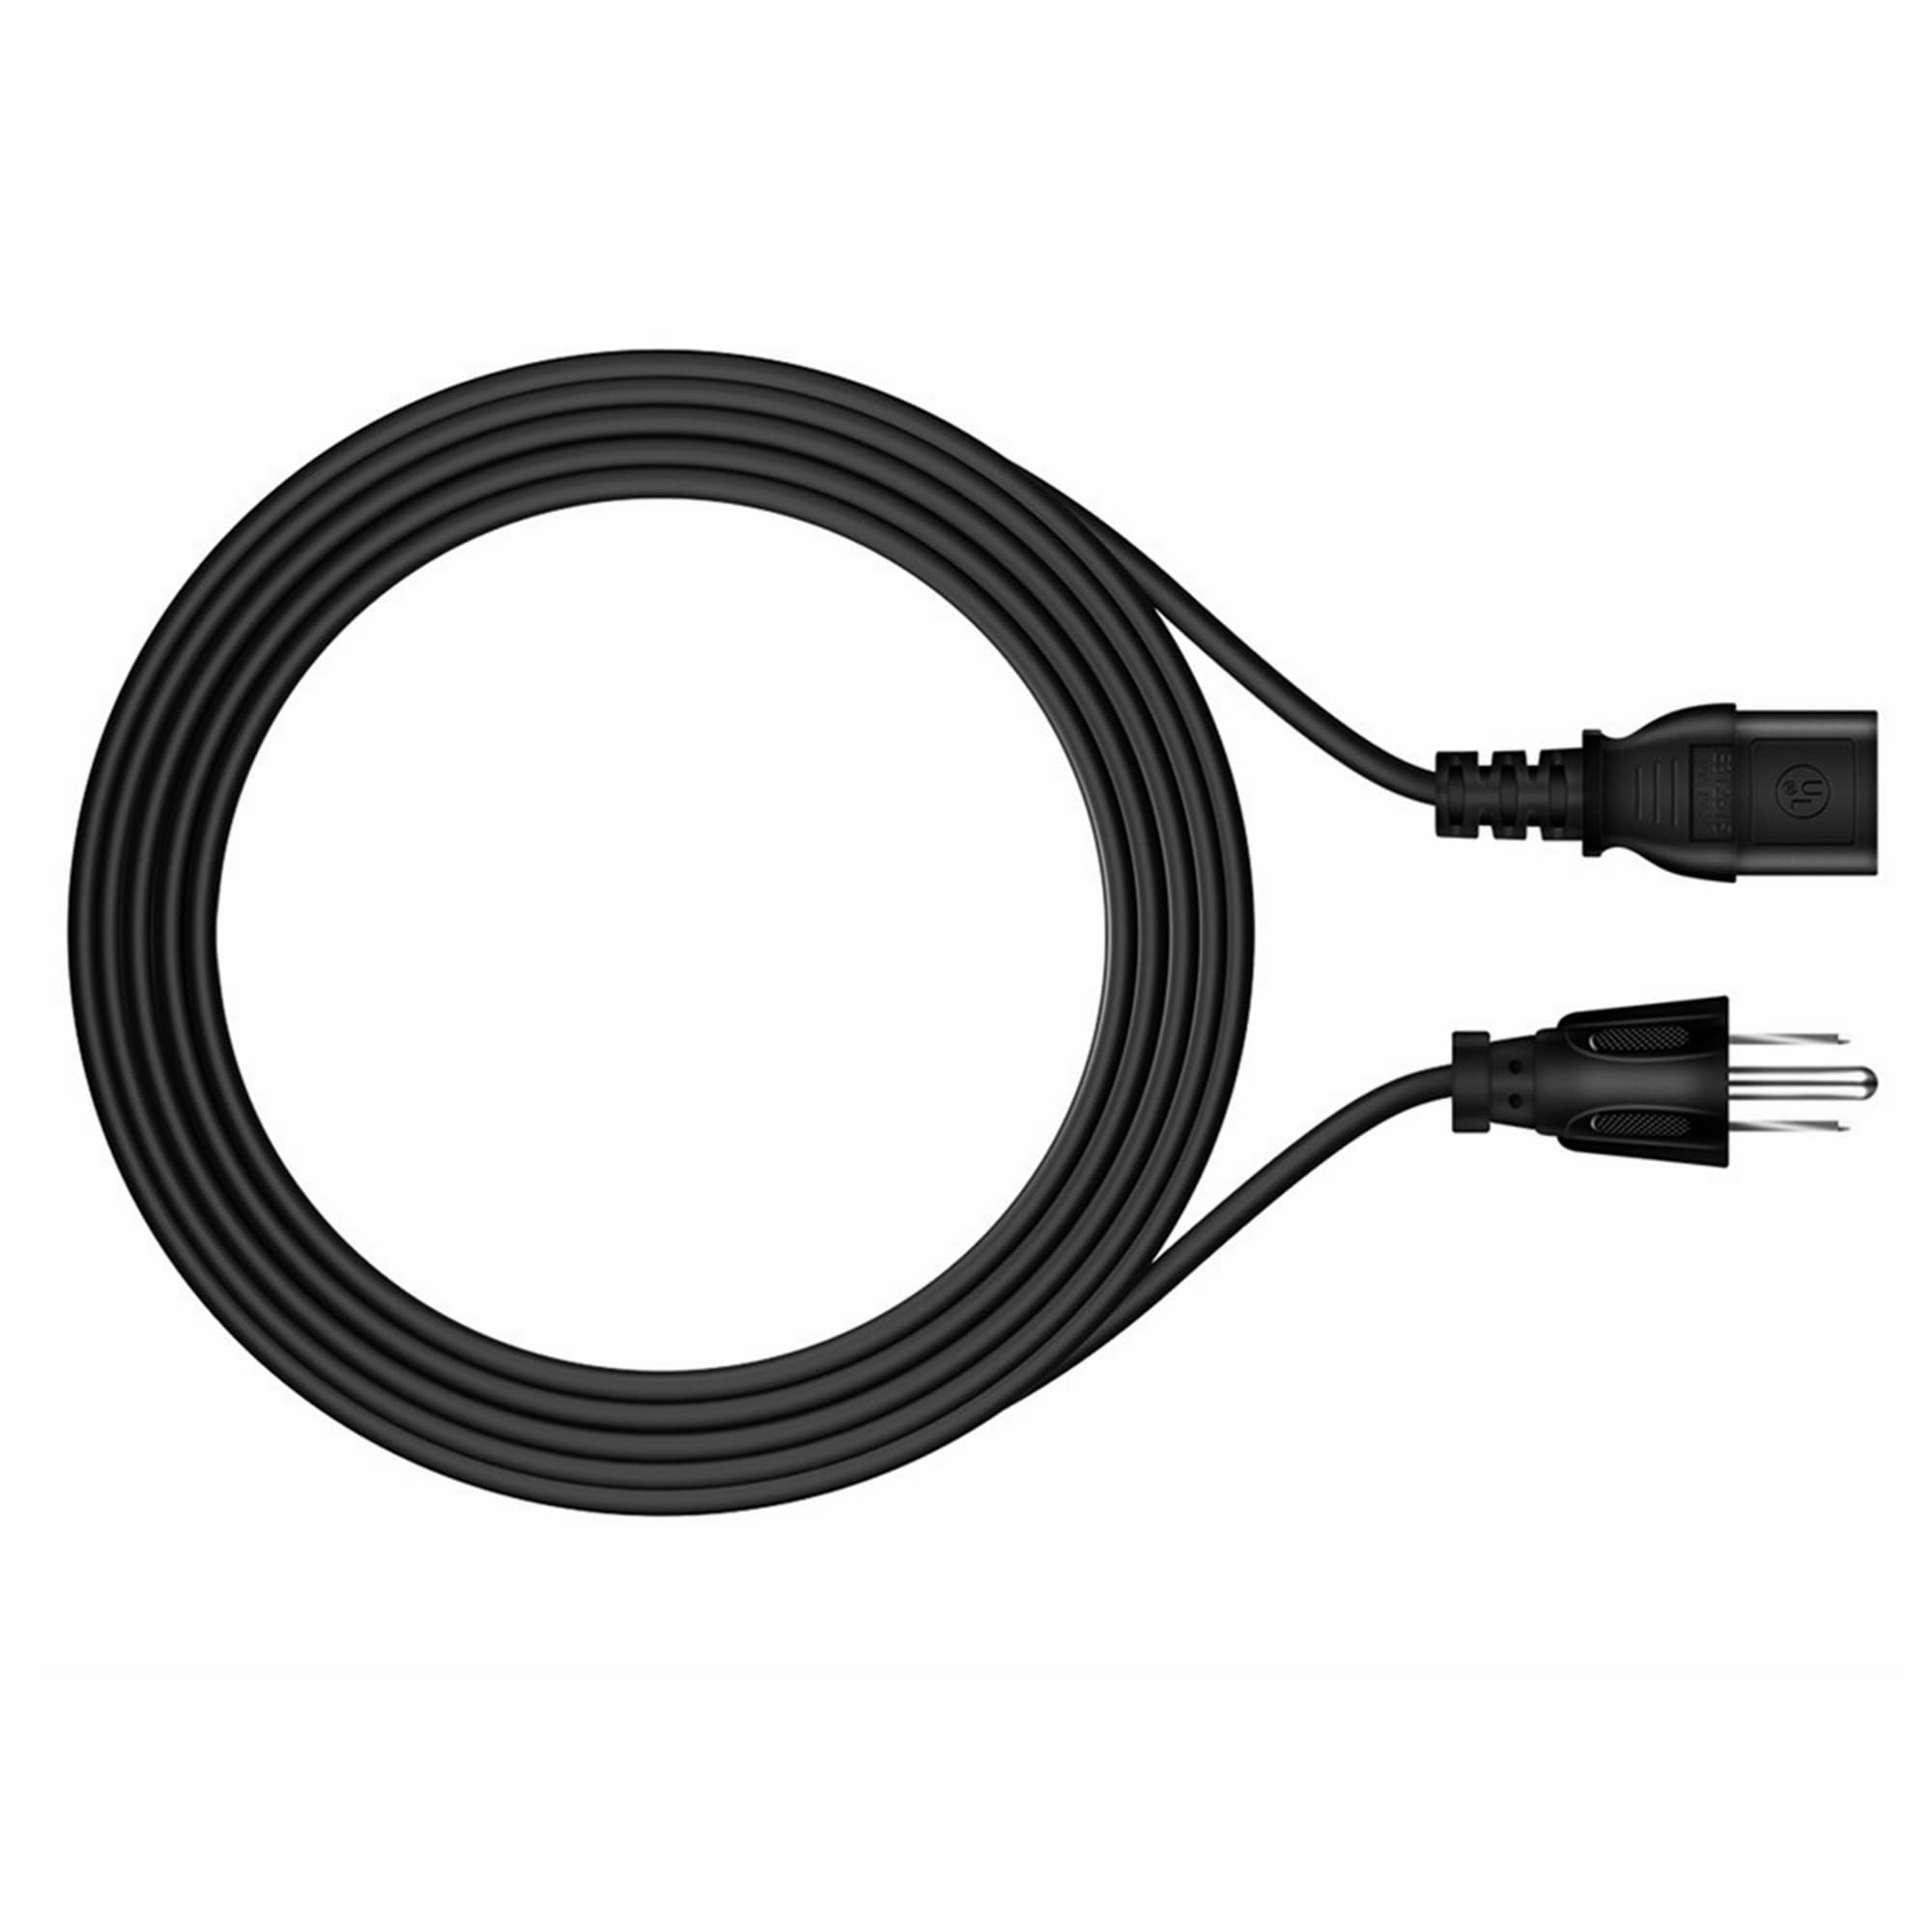 FITE ON UL 5ft 3 Prong AC Power Cord Cable Lead for Zojirushi NL-AAC10 Rice Cooker Mains